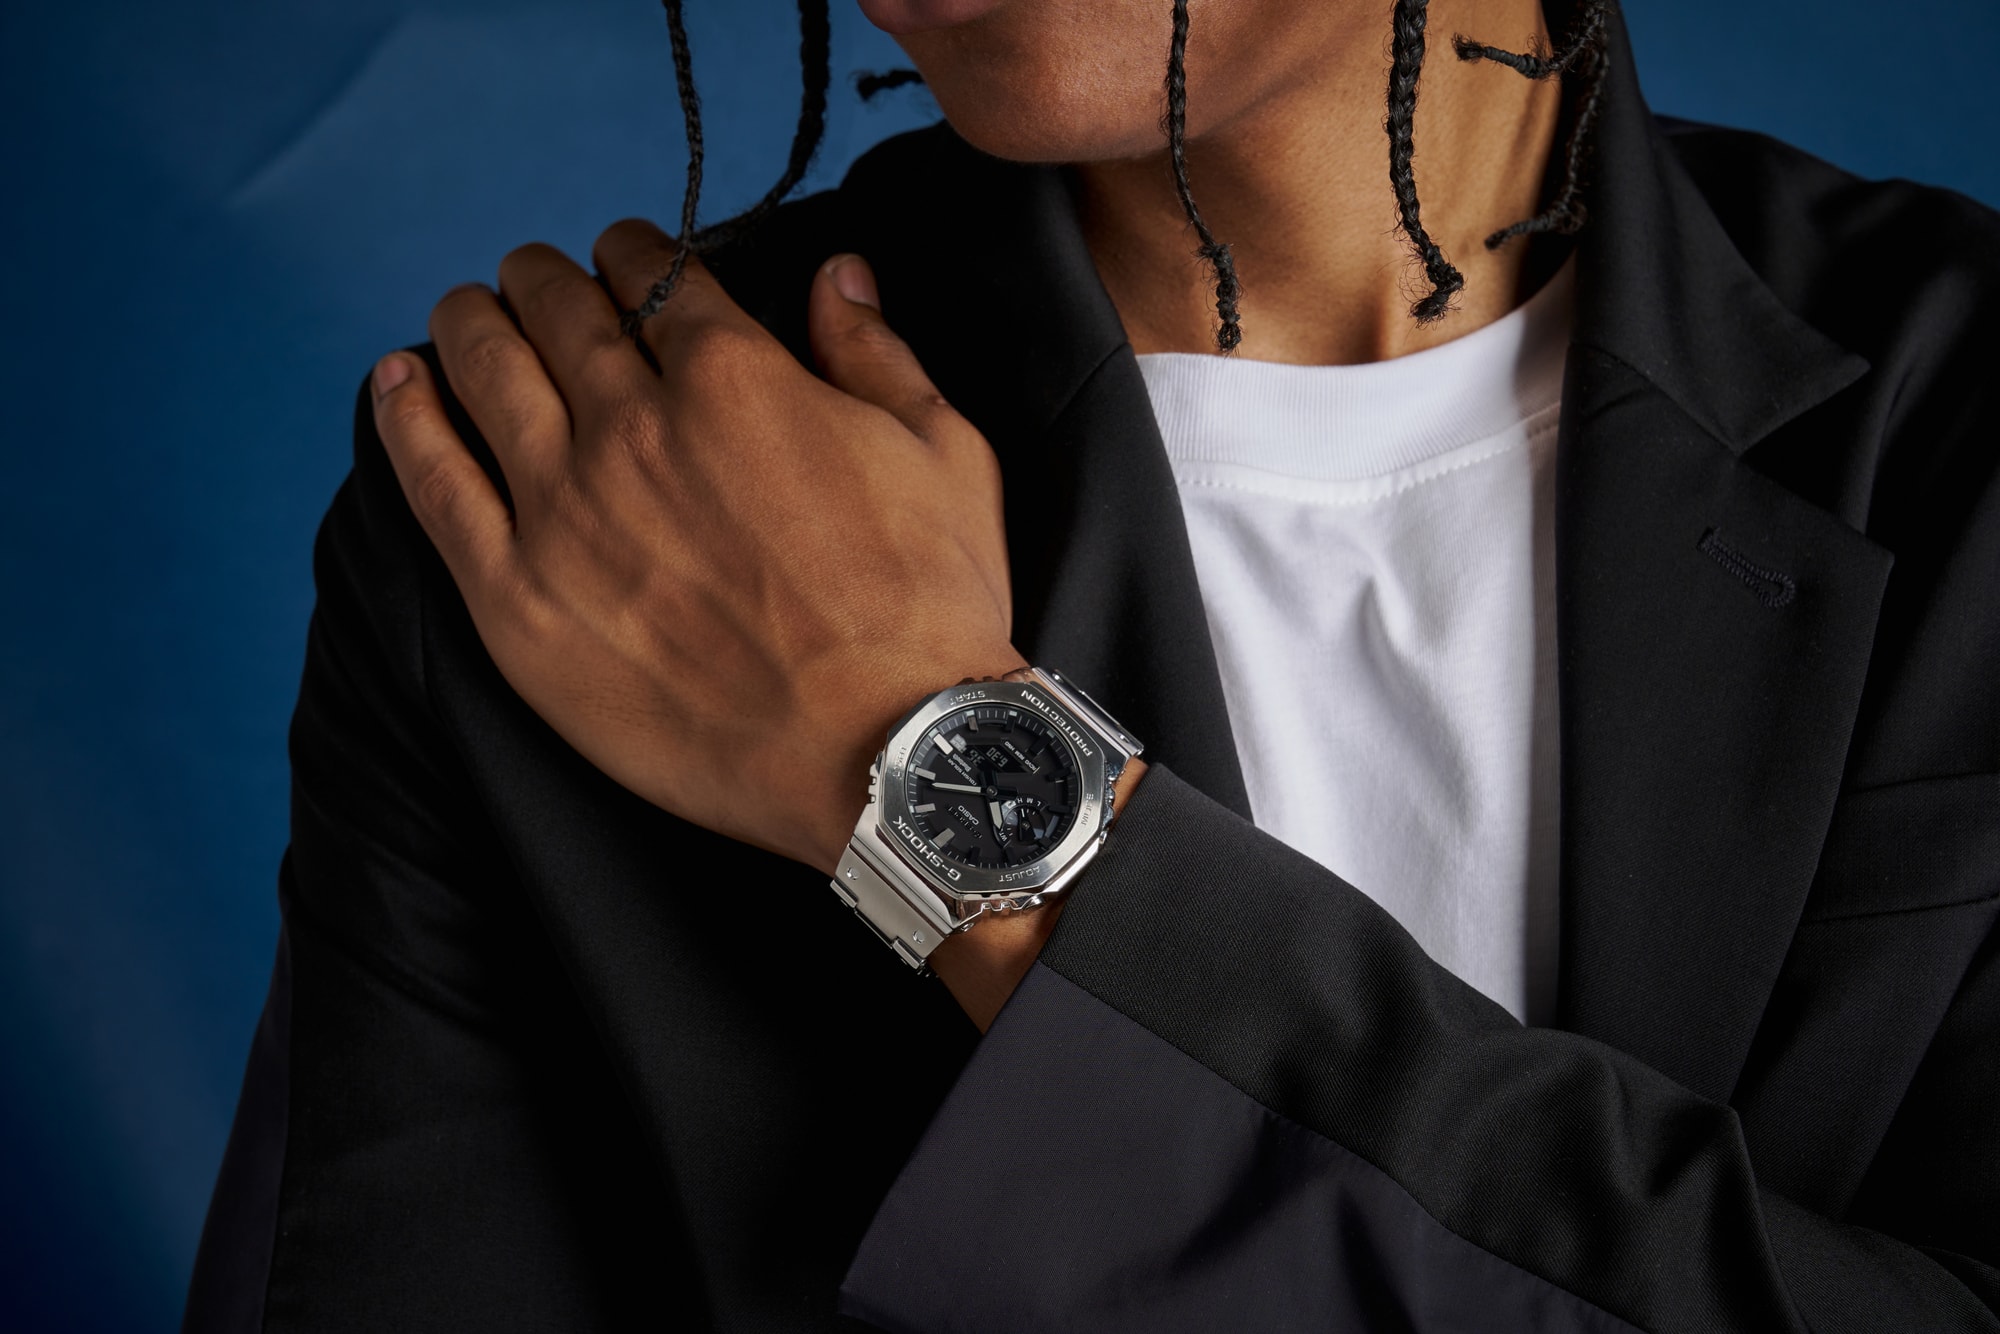 G-SHOCK Unveils Full-Metal Series DW-5000C Model 2100 Range Stainless Steel Resin Band Case Bezel GMB2100D-1A GMB2100BD-1A GMB2100GD-5A